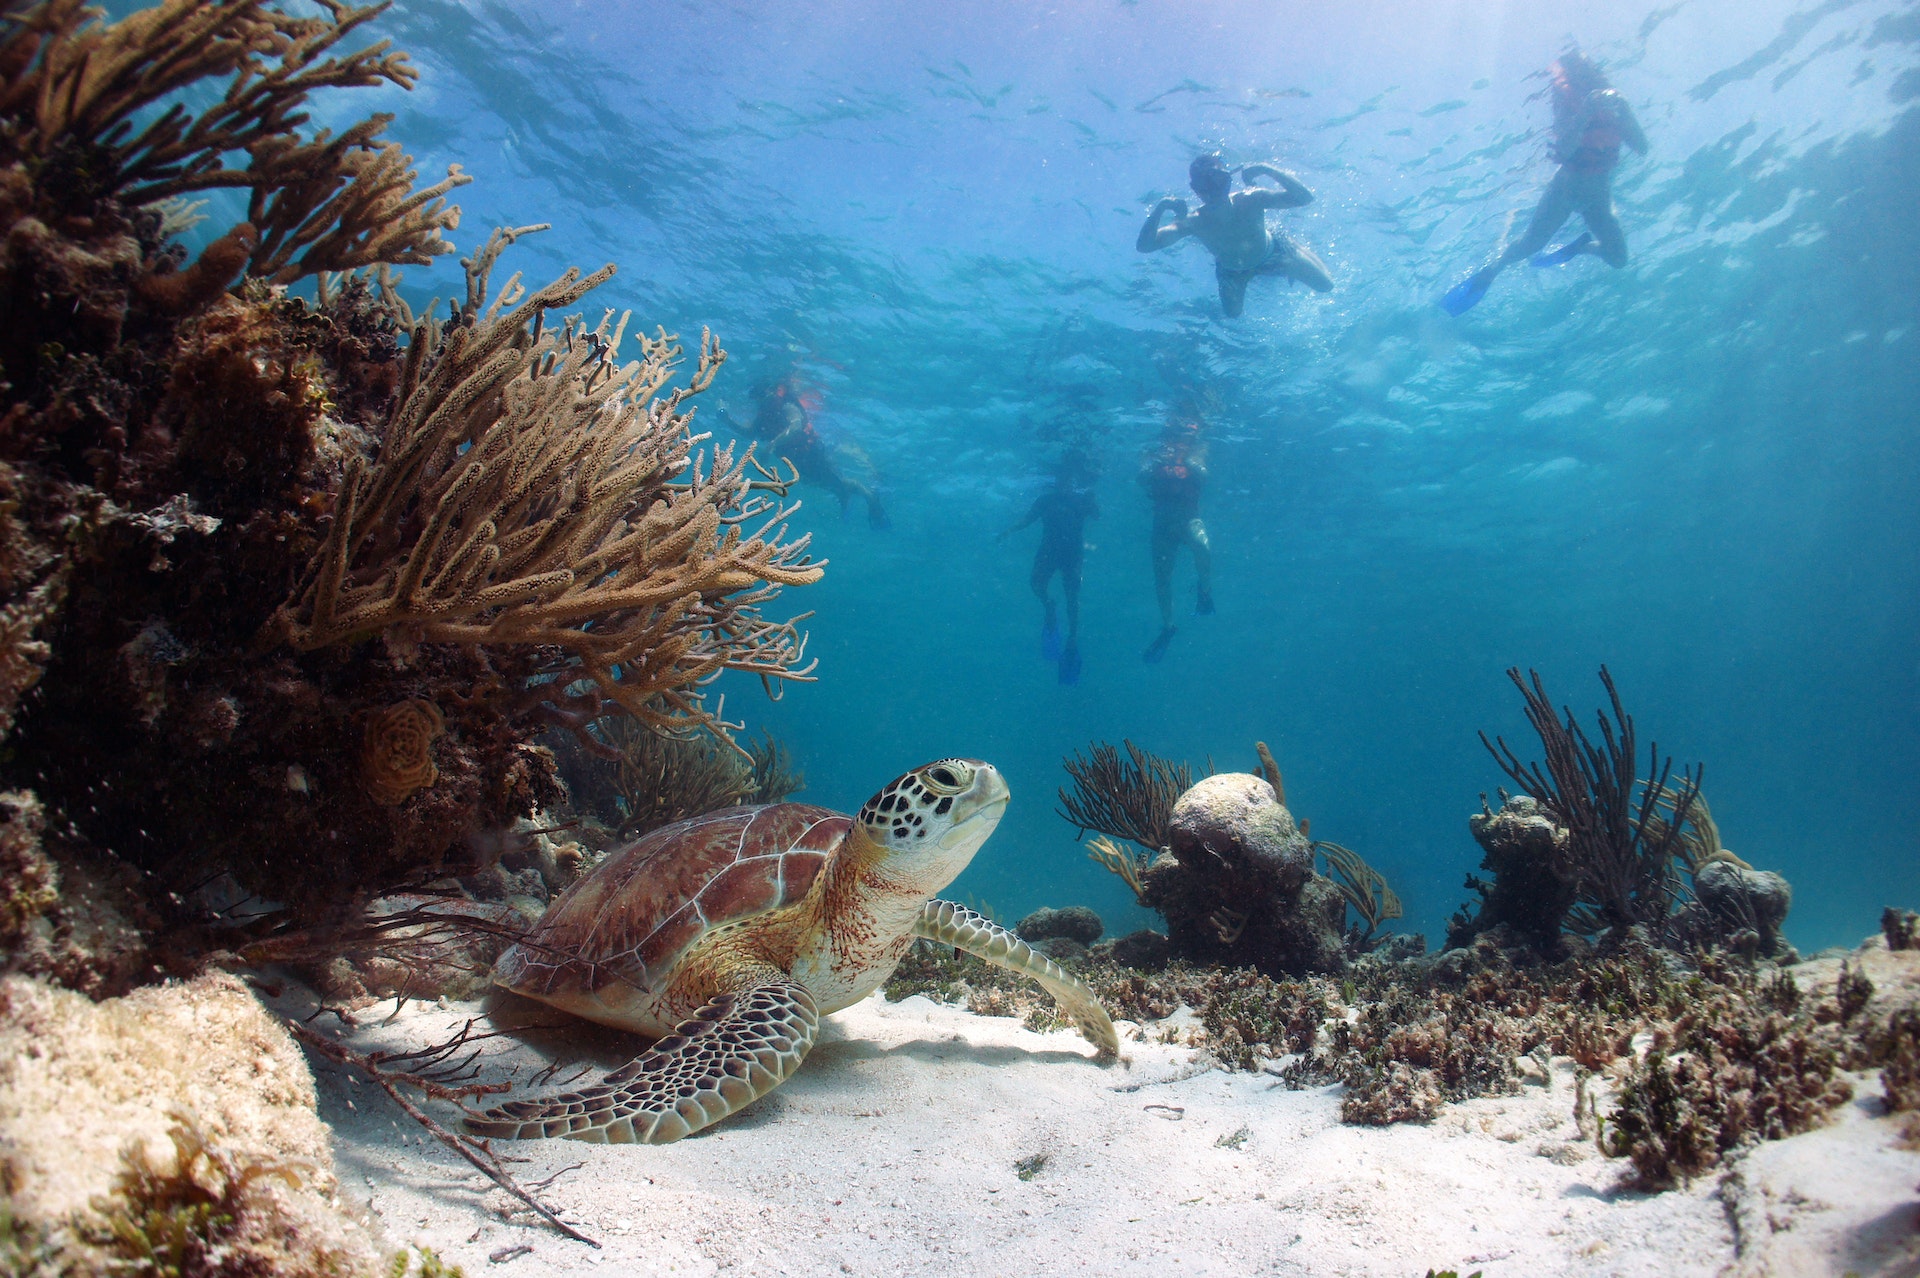 Snorkelers observe a sea turtle from a safe distance as it sits on the ocean floor